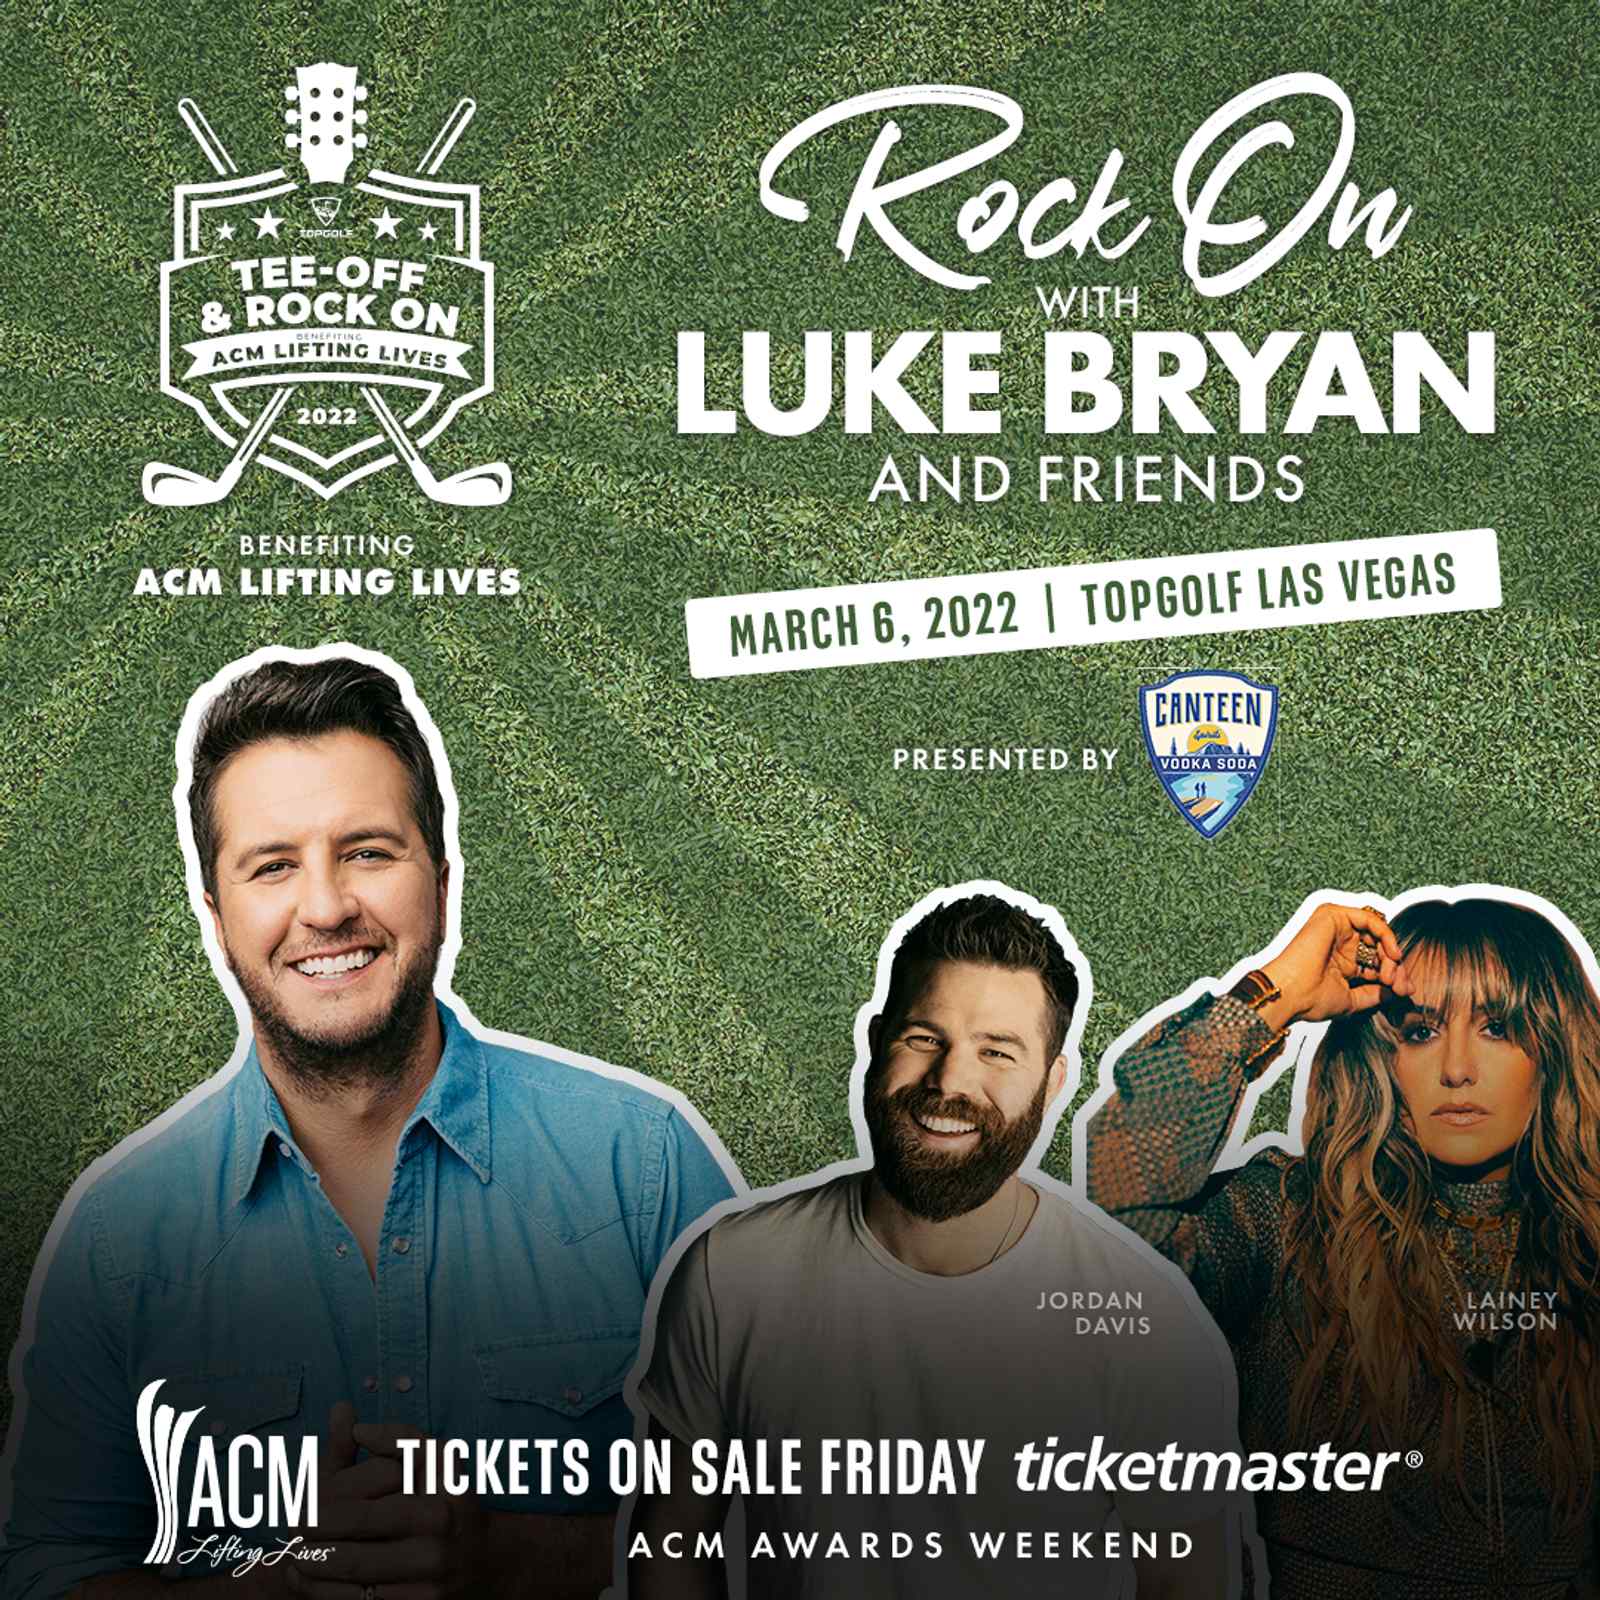 ACM LIFTING LIVES® ANNOUNCES TOPGOLF TEE-OFF & ROCK ON PRESENTED BY CANTEEN SPIRITS SET FOR SUNDAY, MARCH 6